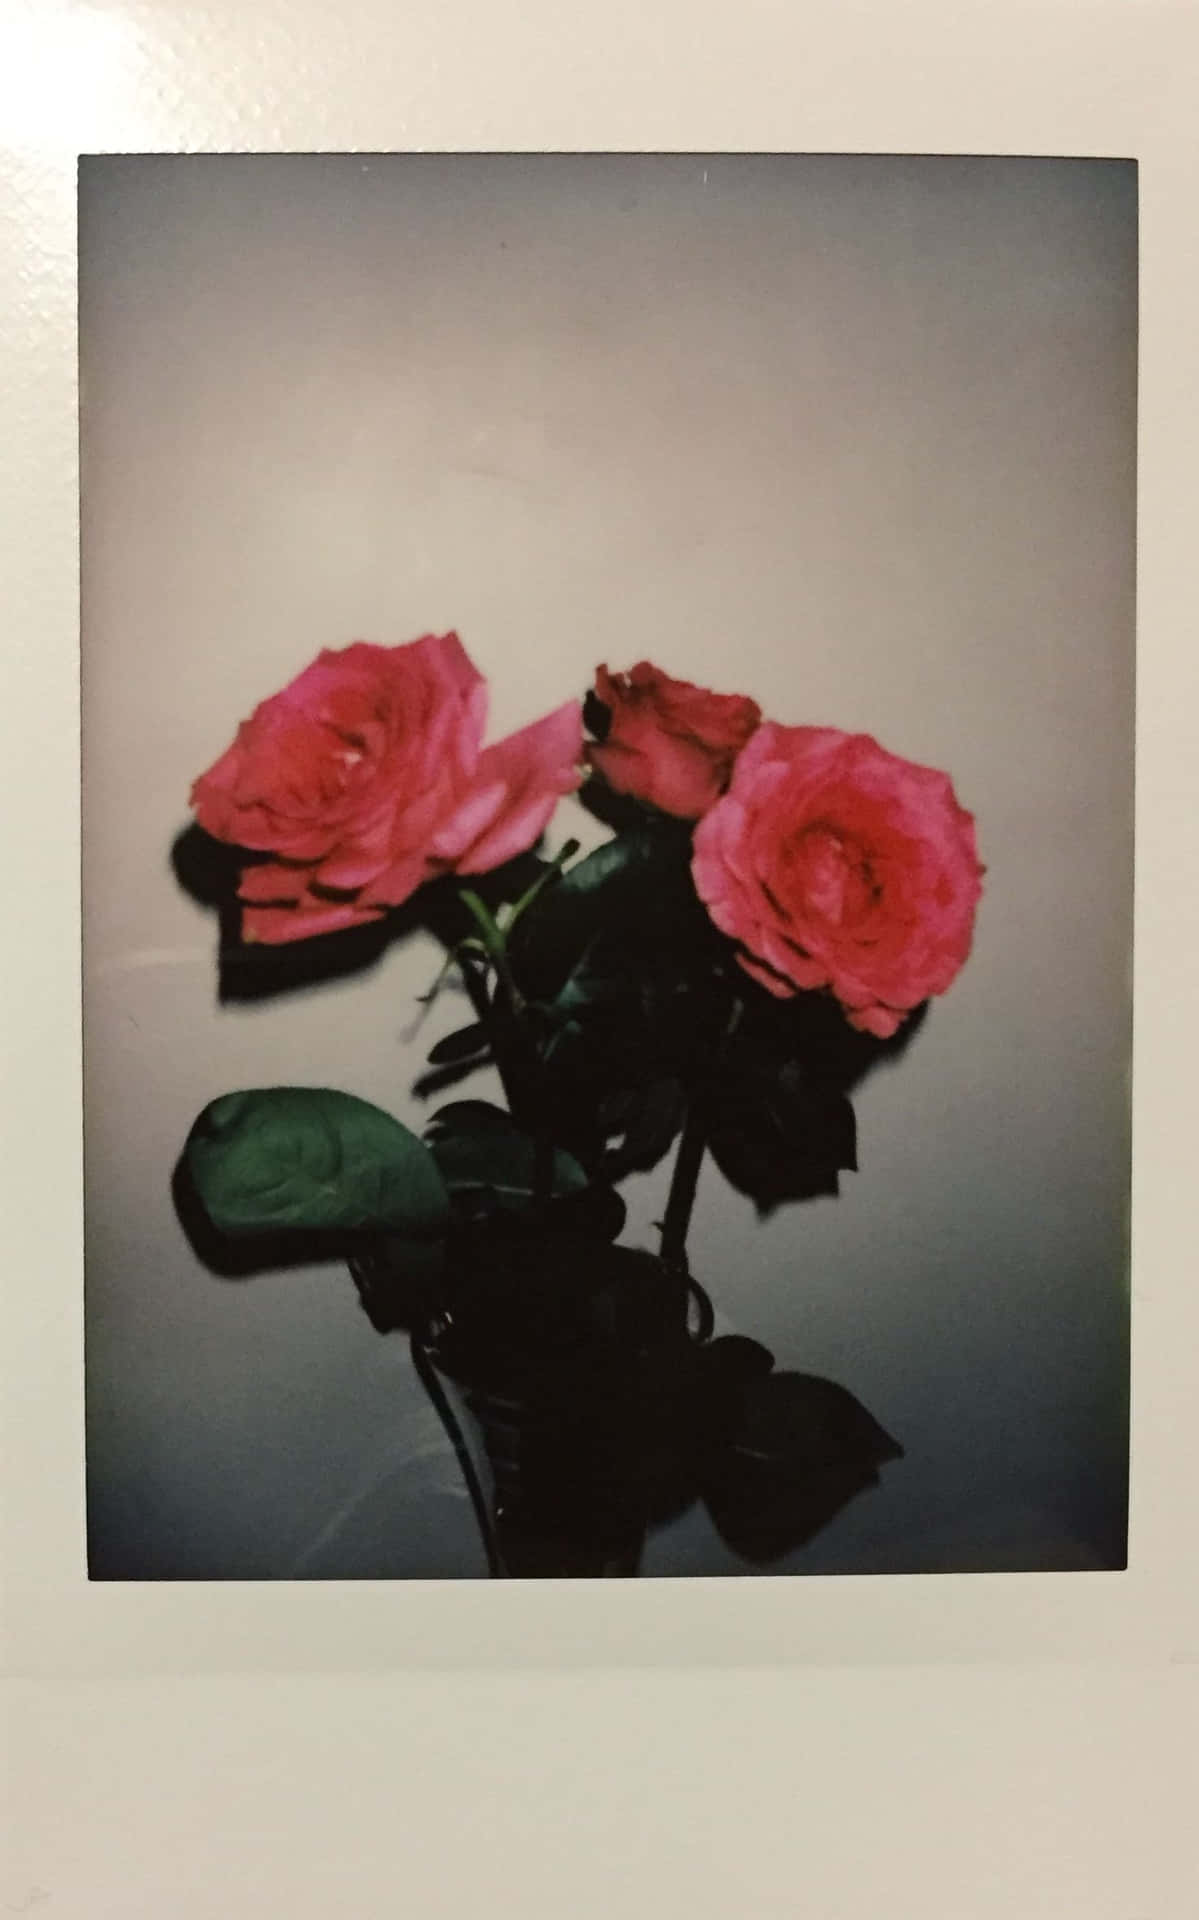 Inspired by vintage looks, this Aesthetic Polaroid captures the timeless beauty of yesteryear.